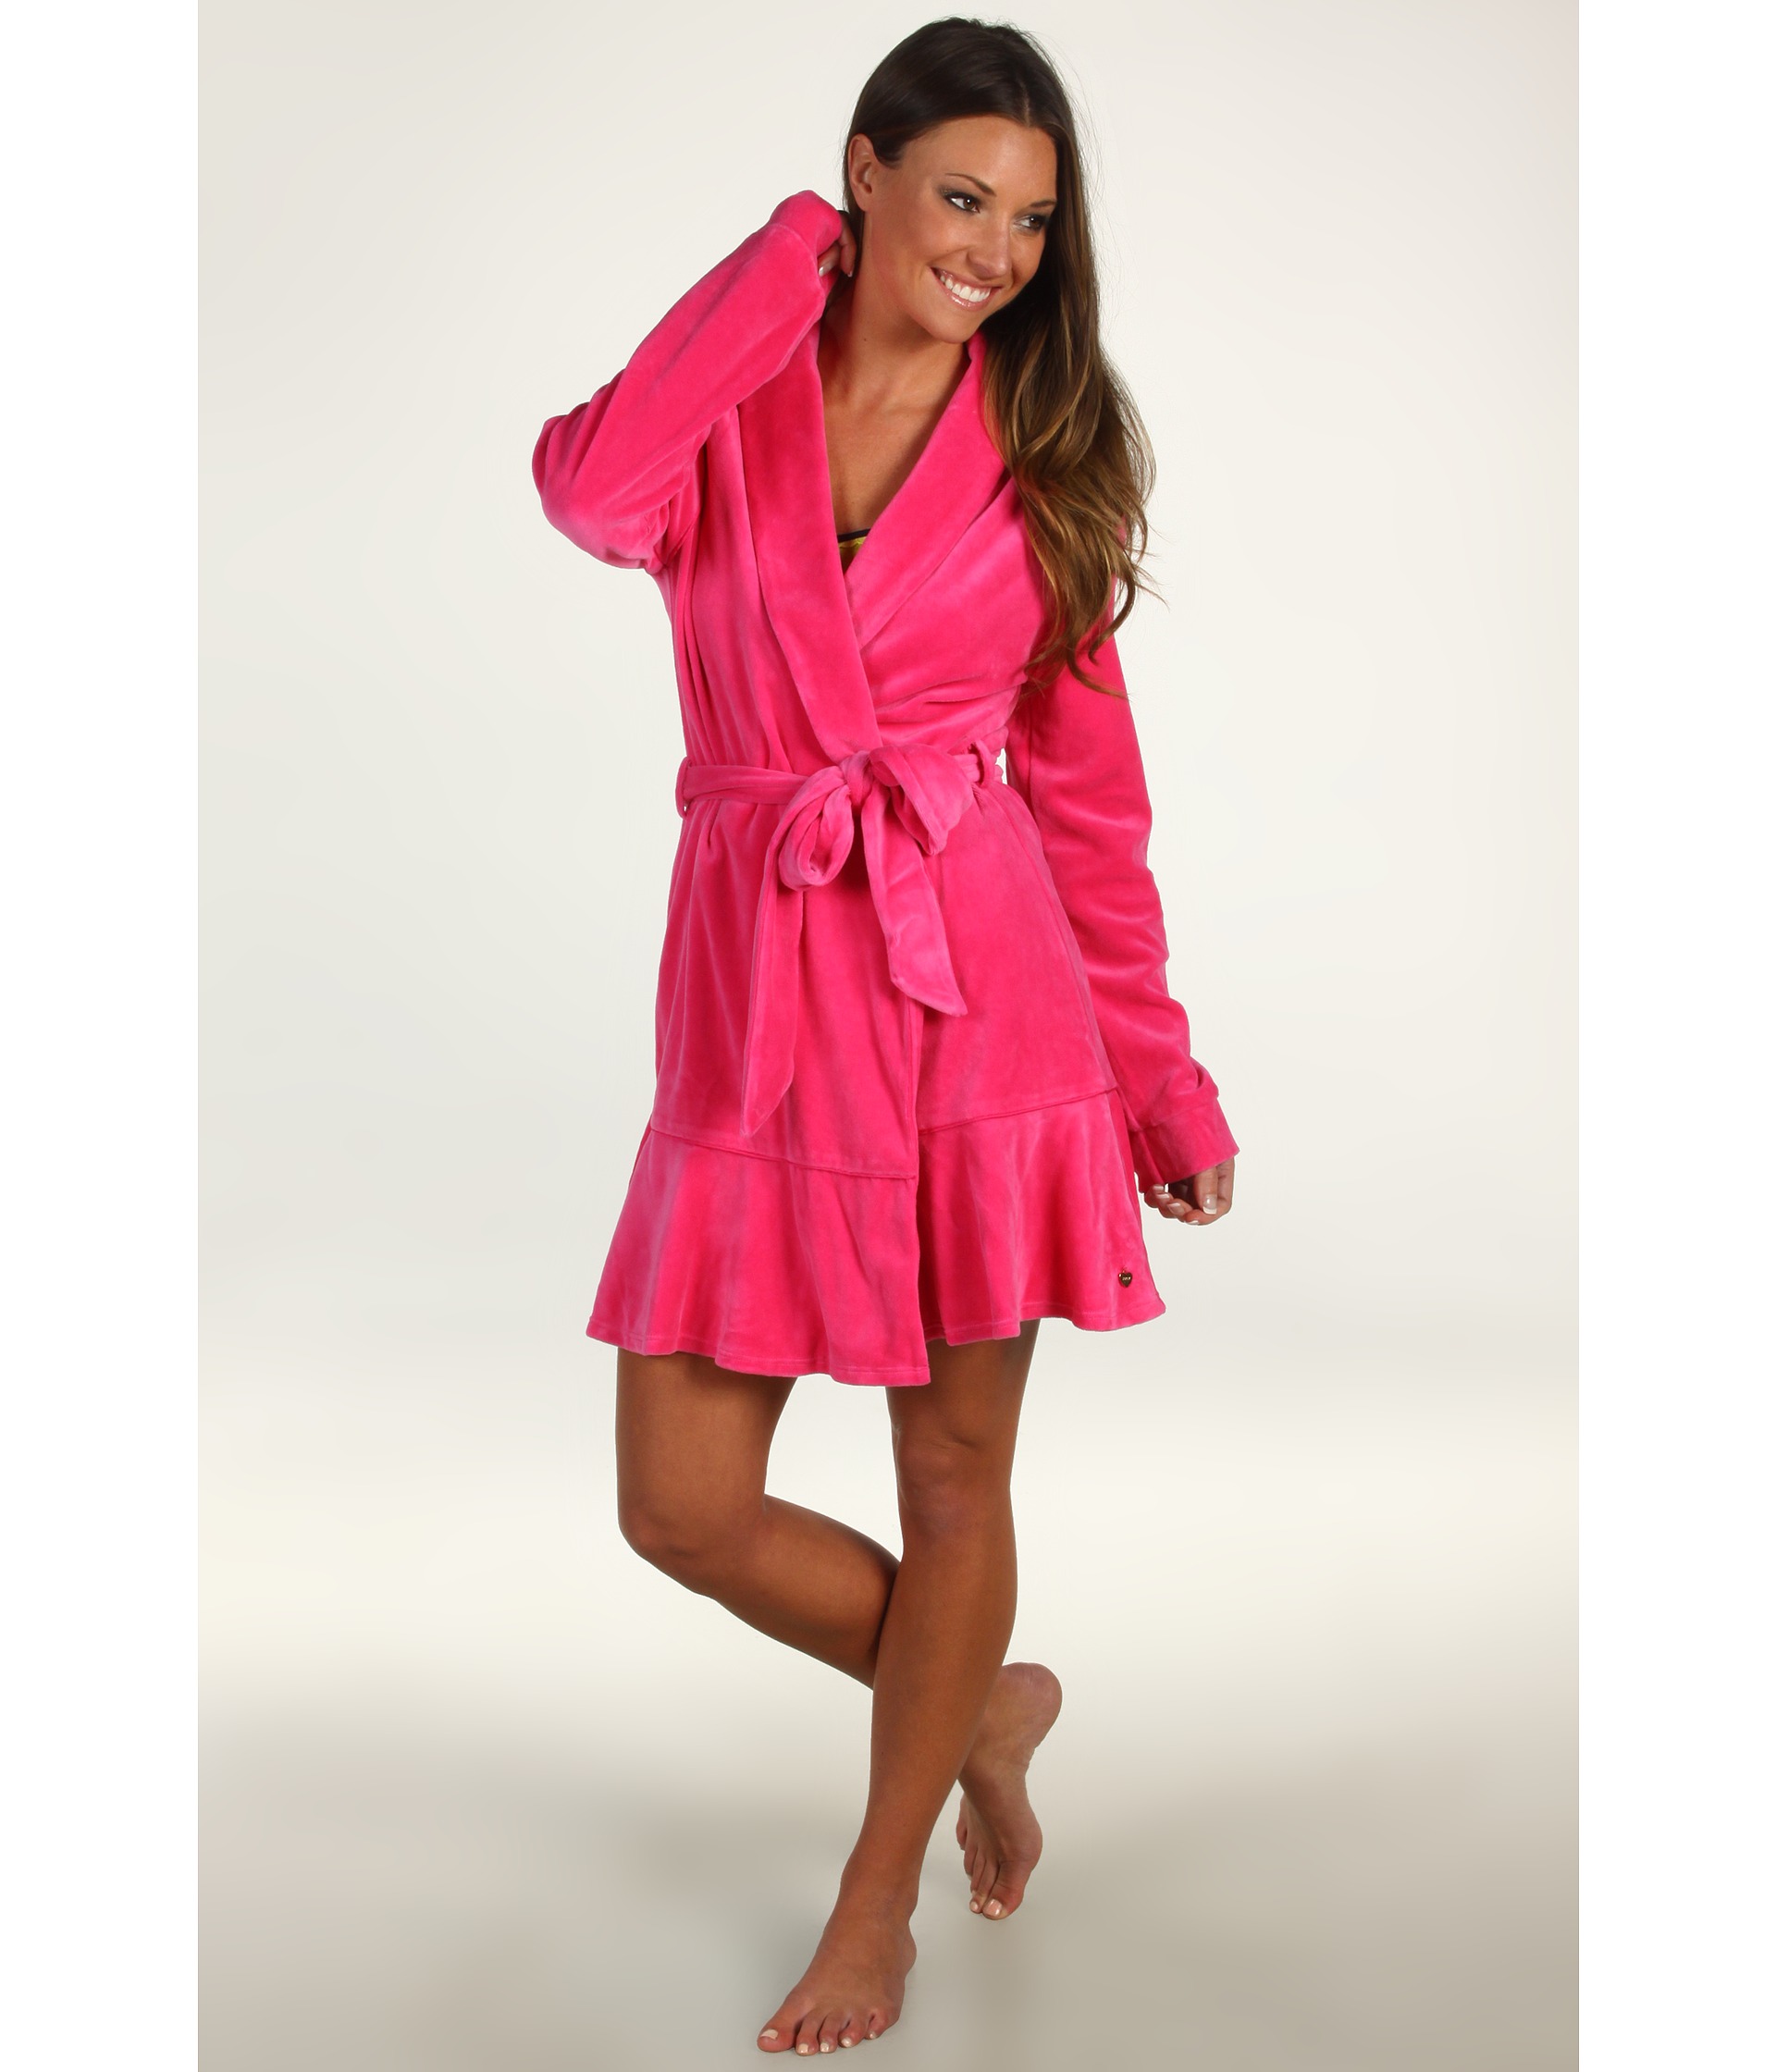 juicy couture velour robe $ 98 00 juicy couture melton